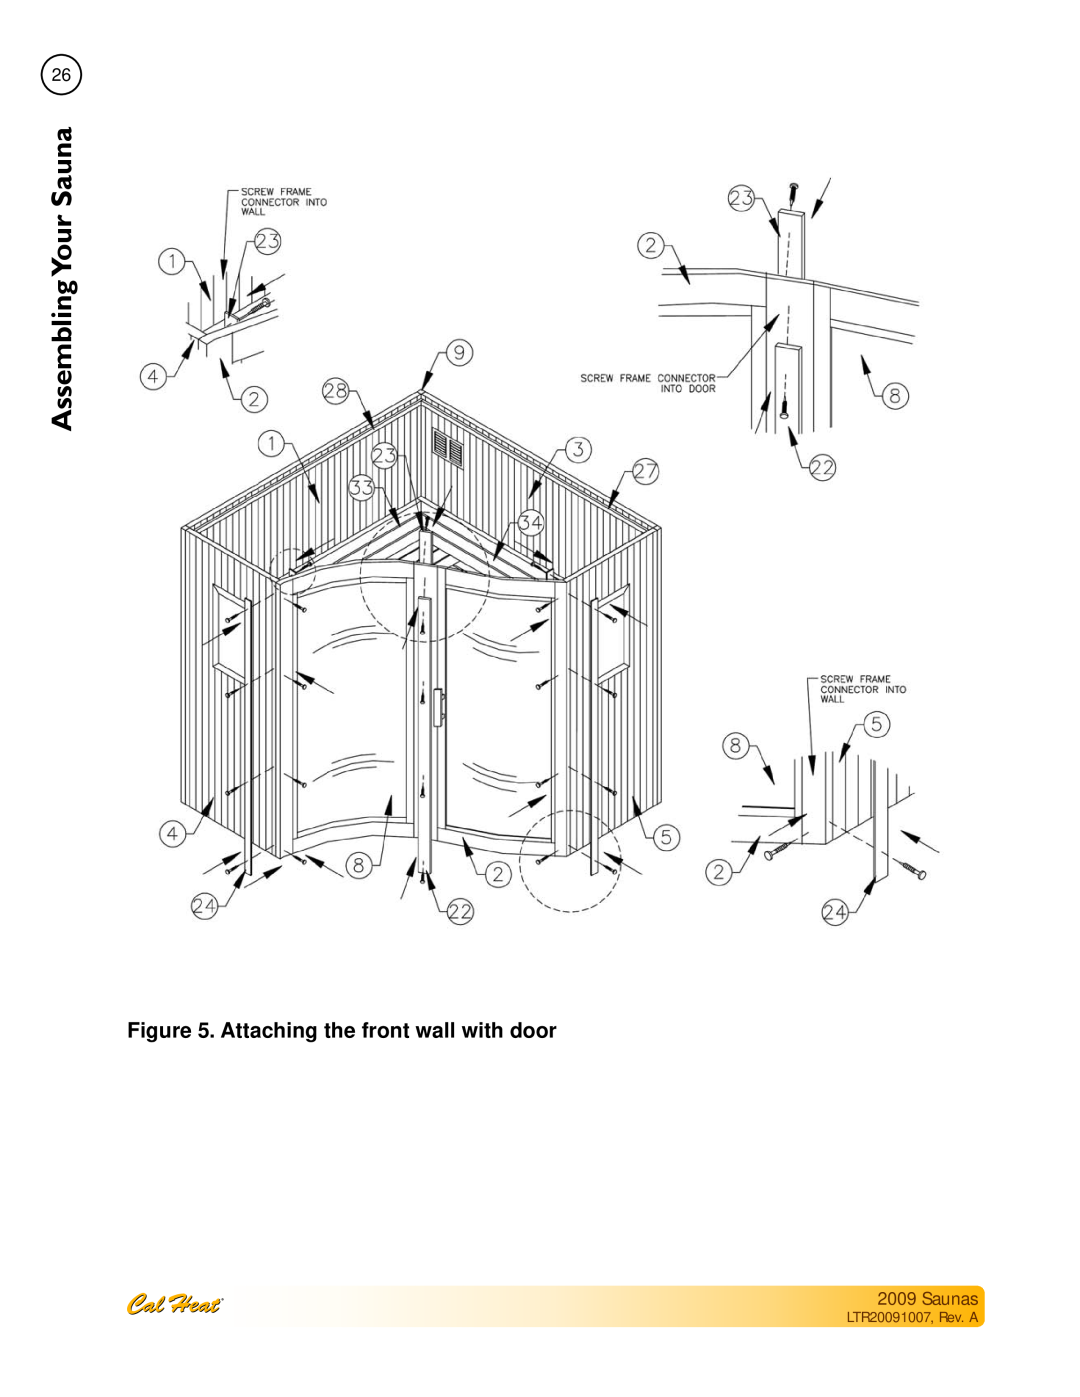 Cal Spas Saunas manual SaunaYour Assembling, Attaching the front wall with door, LTR20091007, Rev. A 